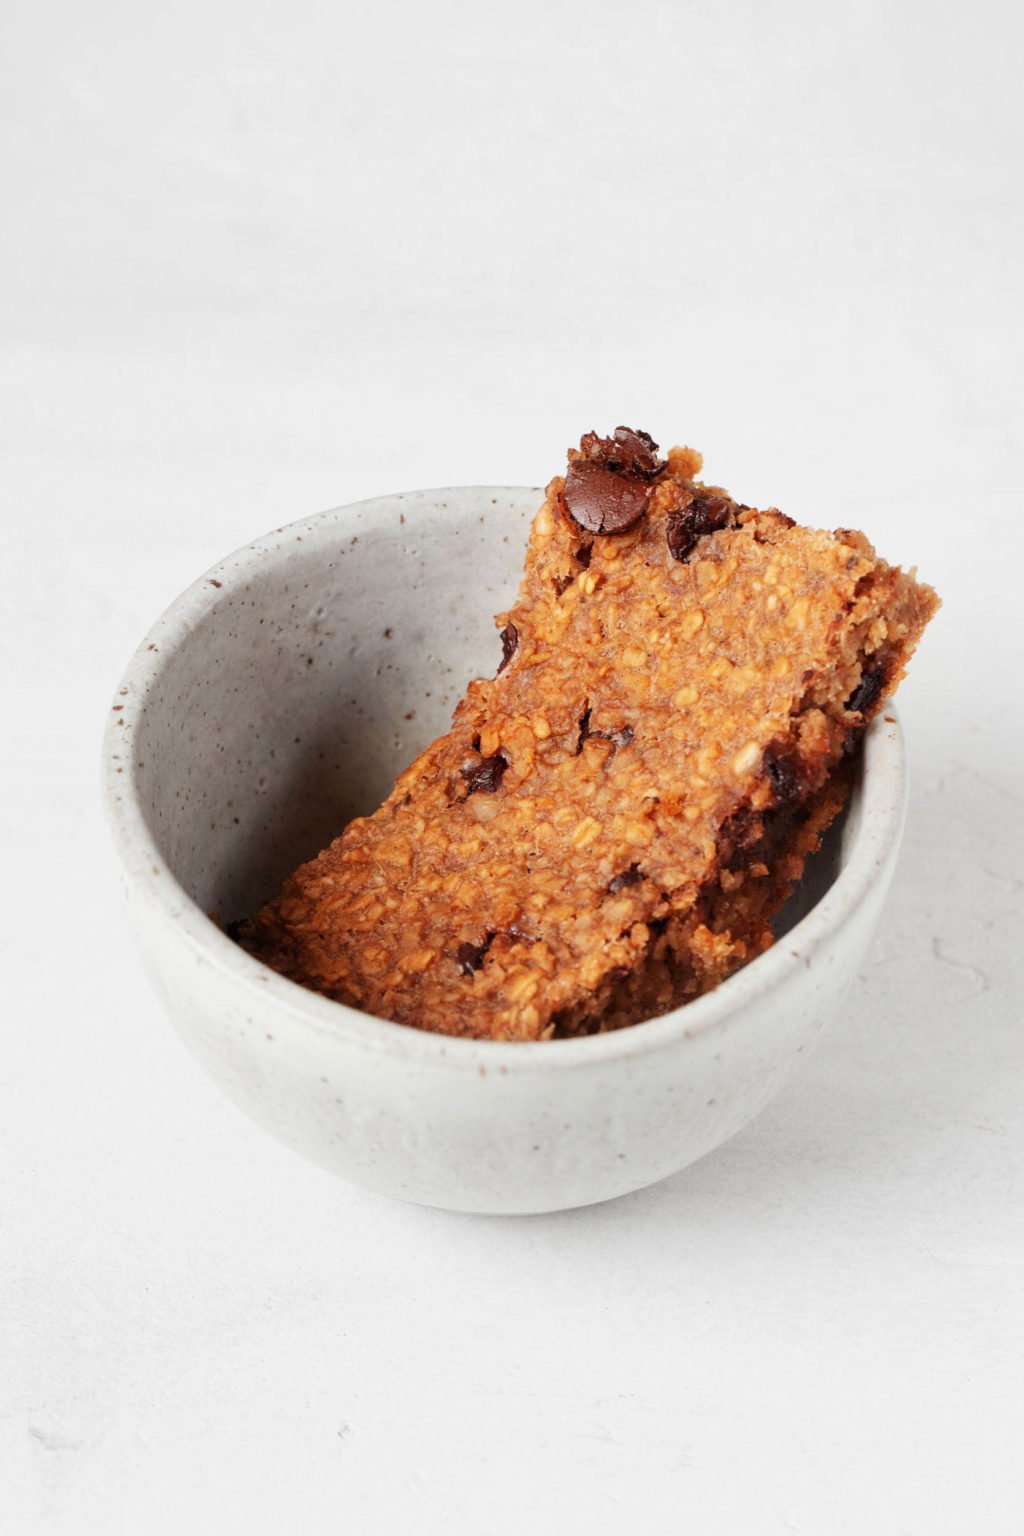 A small, white bowl is filled with a slice of a baked, whole grain breakfast that is dotted with chocolate chips.